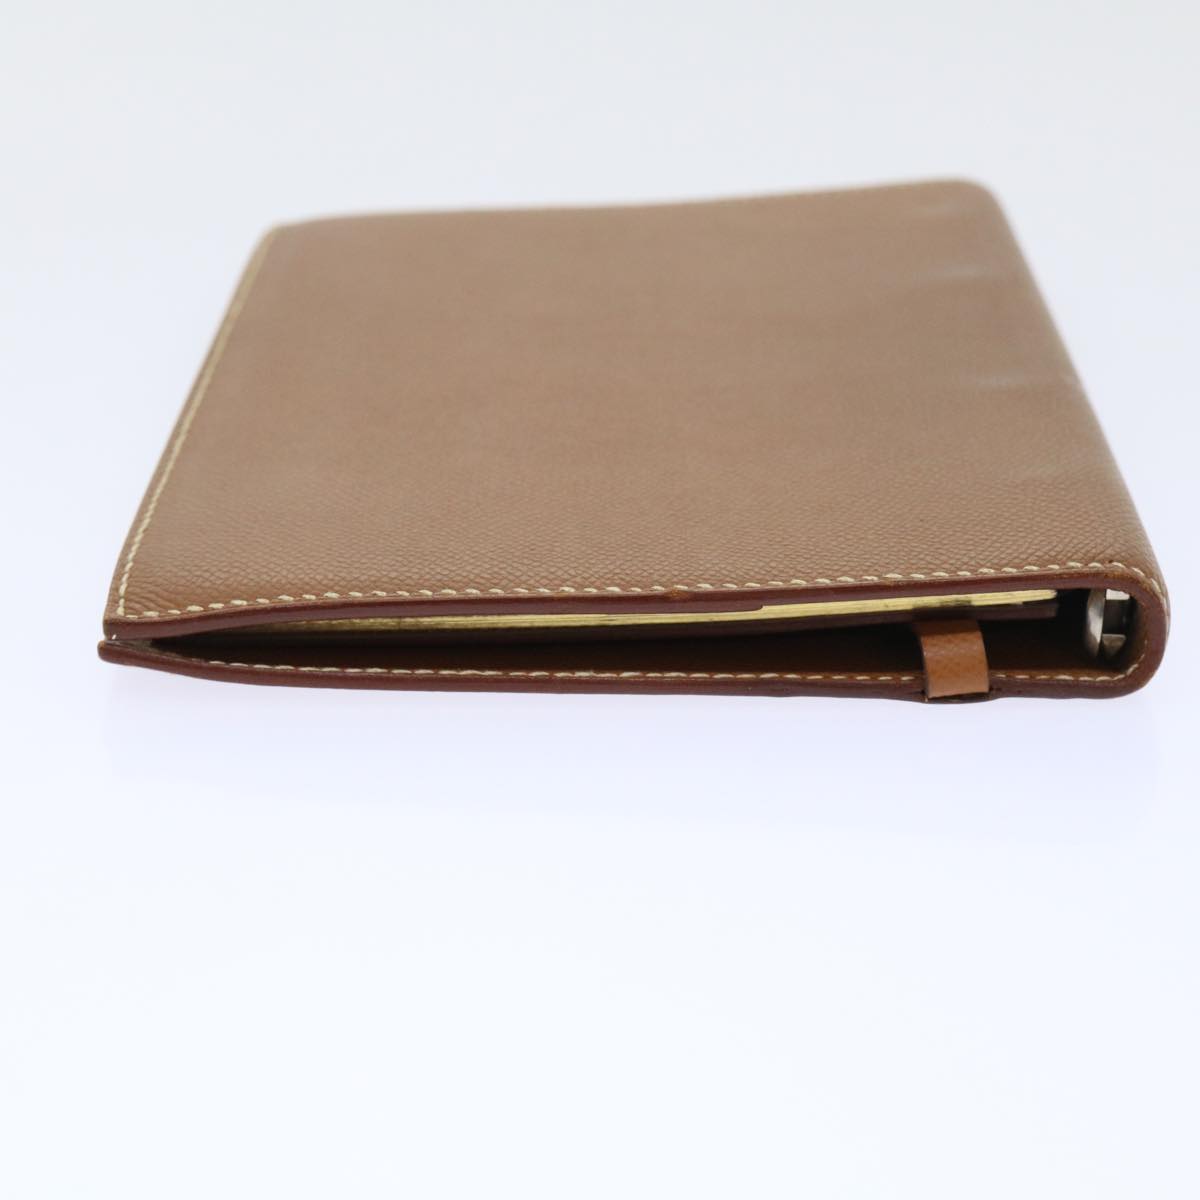 HERMES Day Planner Cover Leather Brown Auth ac2154